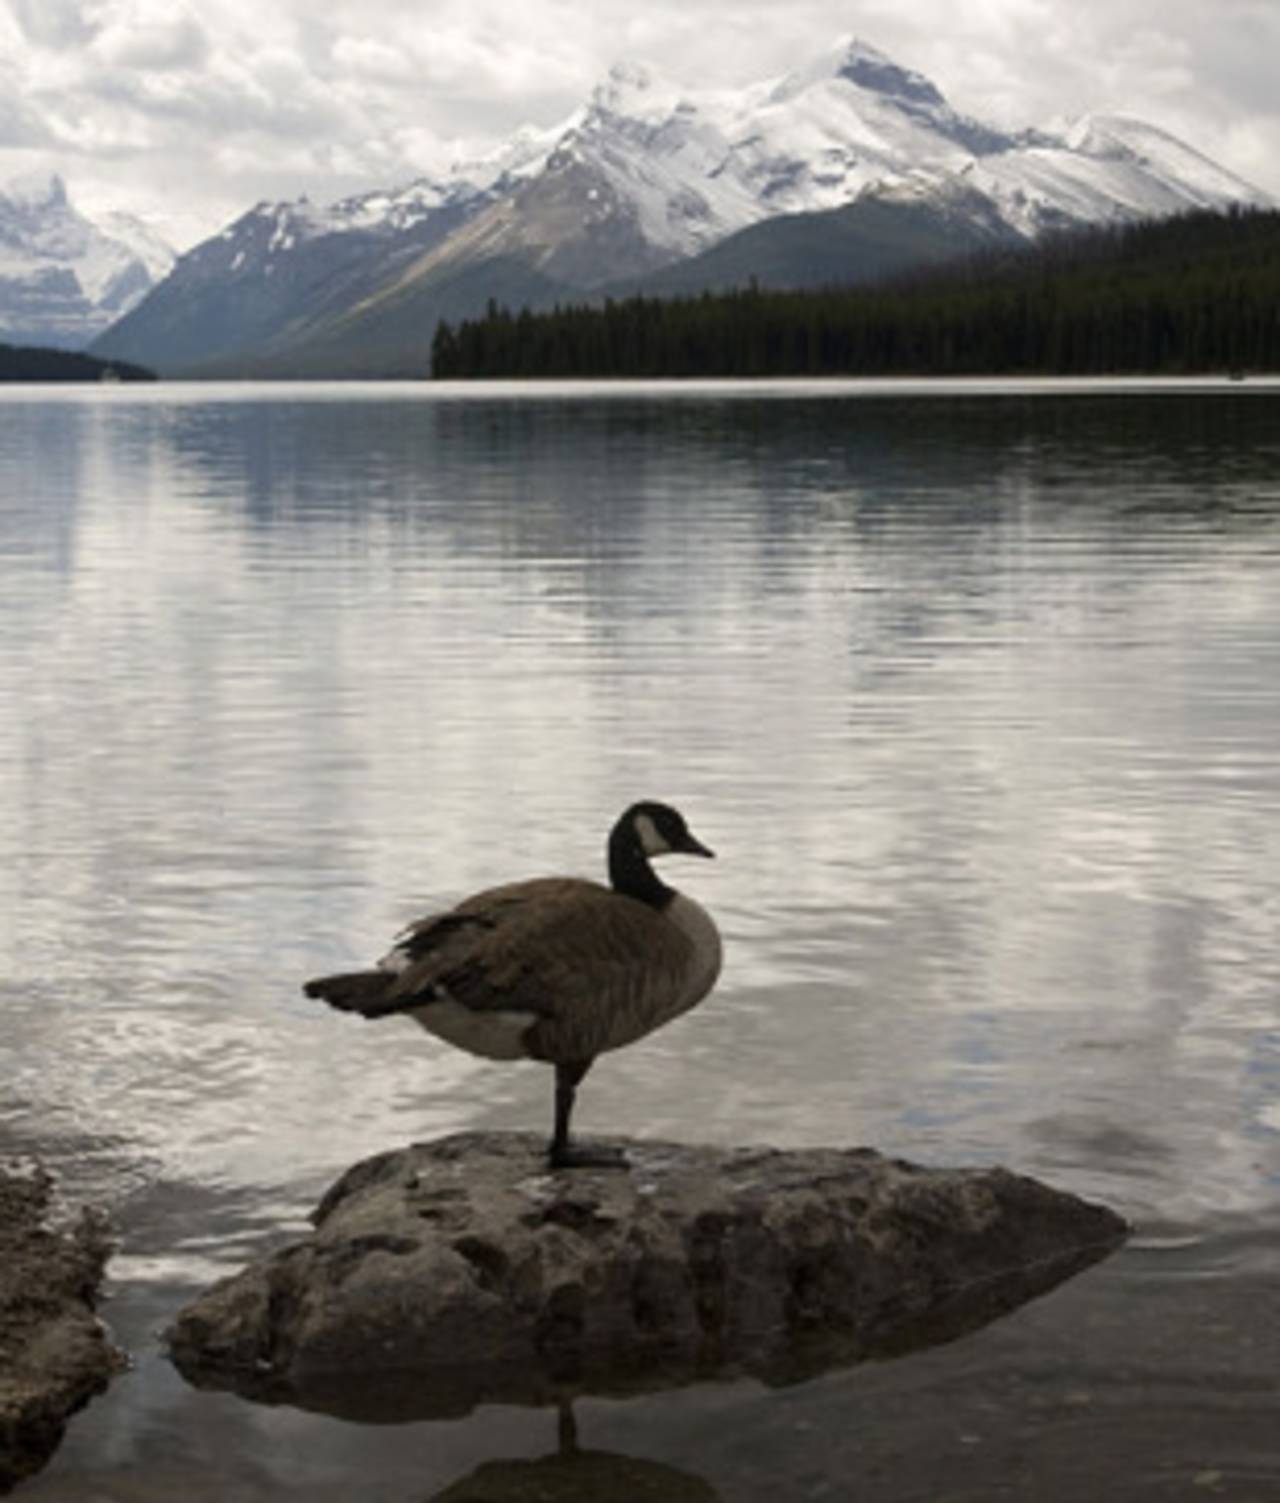 A Canadian goose takes a one-legged nap at the edge of Lake Maligne, Canada, July 5, 2009